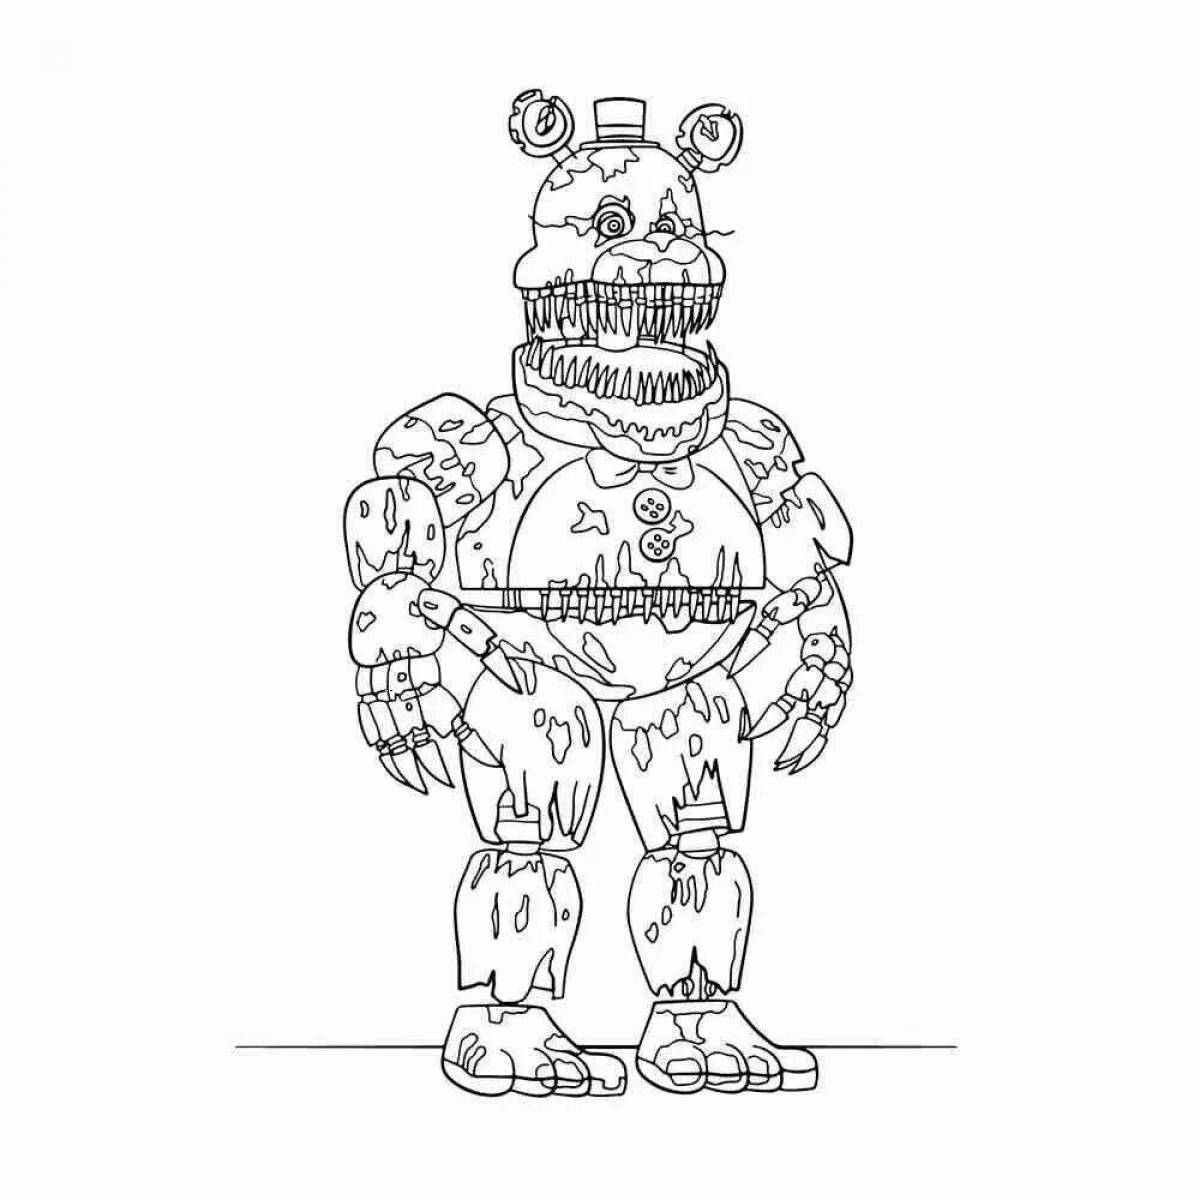 Funny freddy bear coloring book for kids